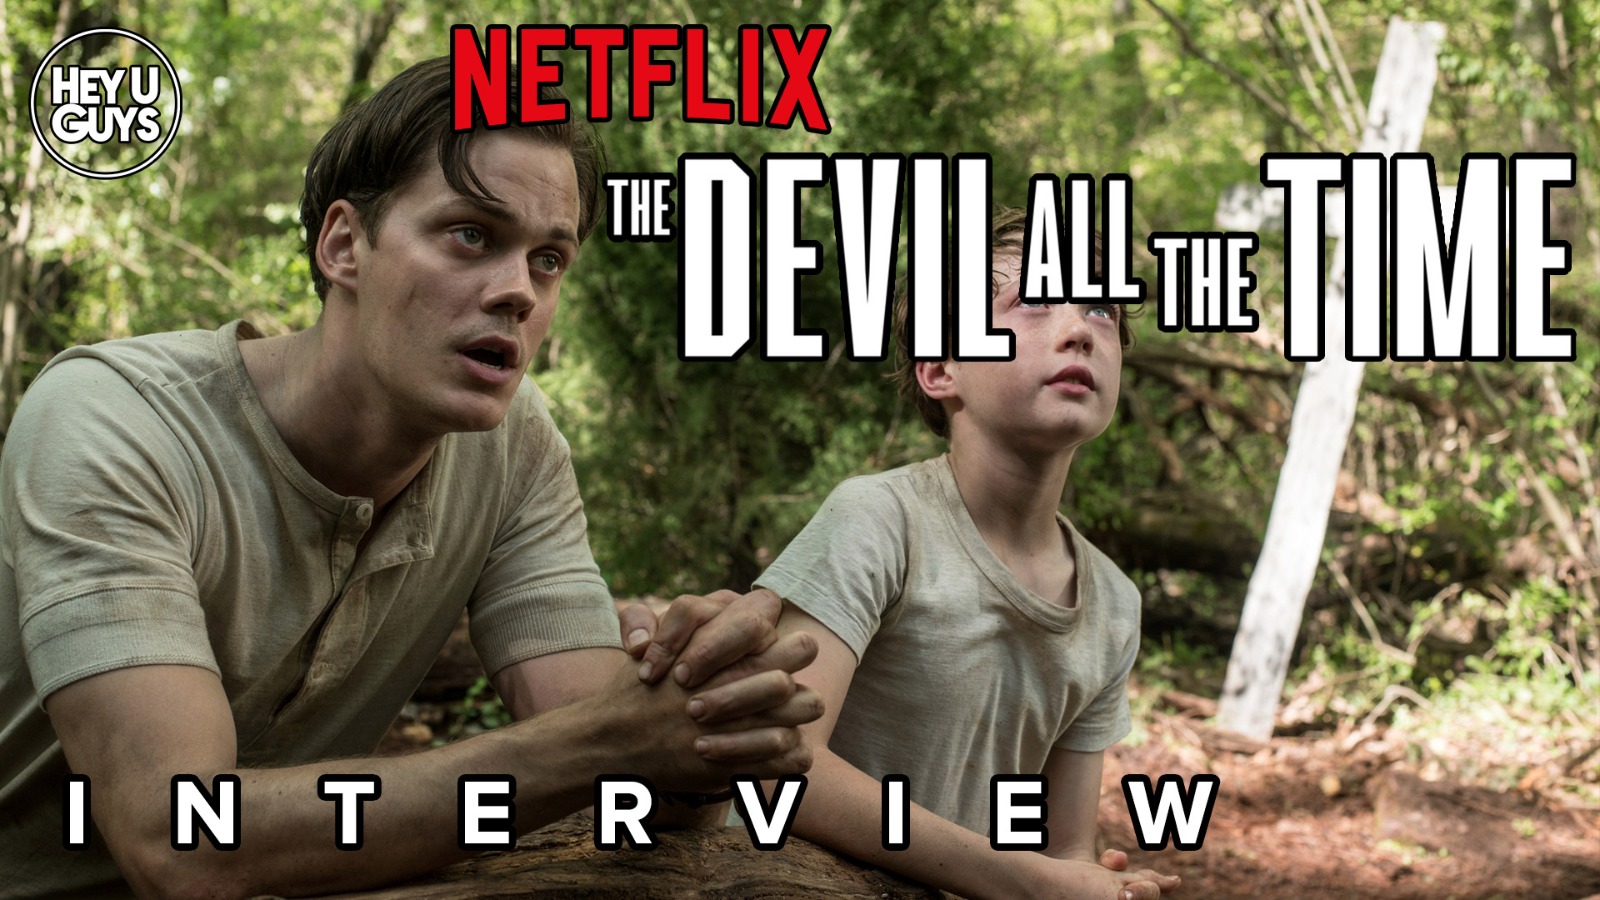 The Devil all the time cast interviewsz